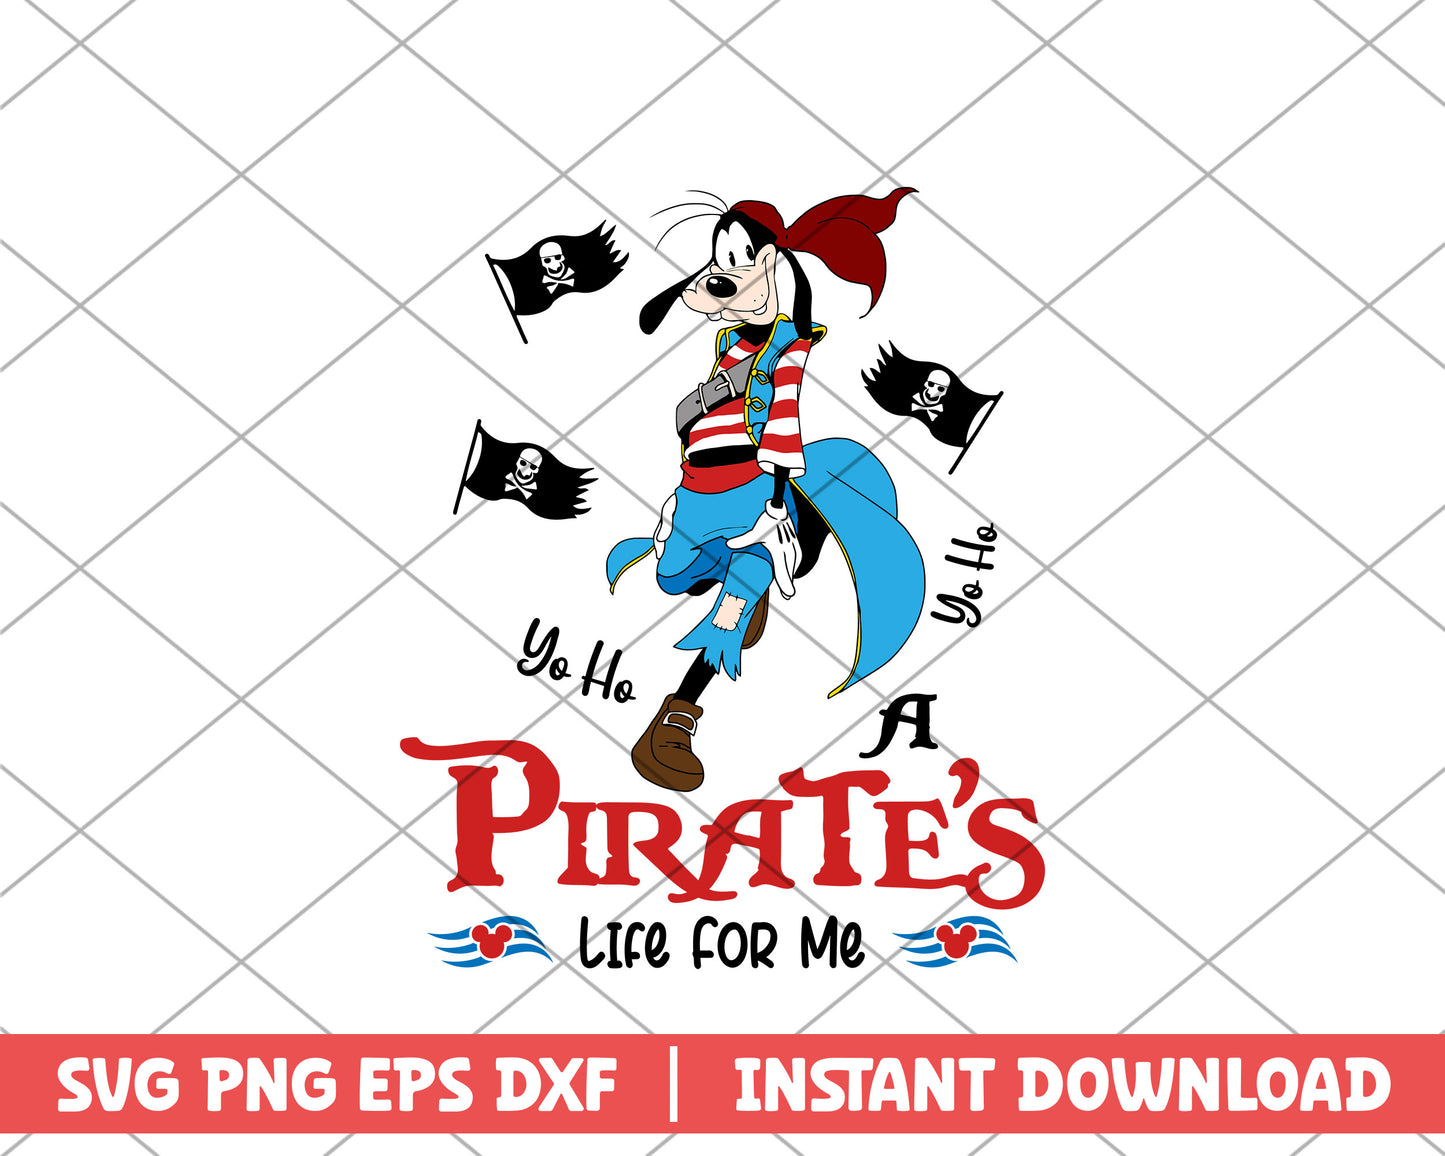 Goofy pifrate's life for me disney svg